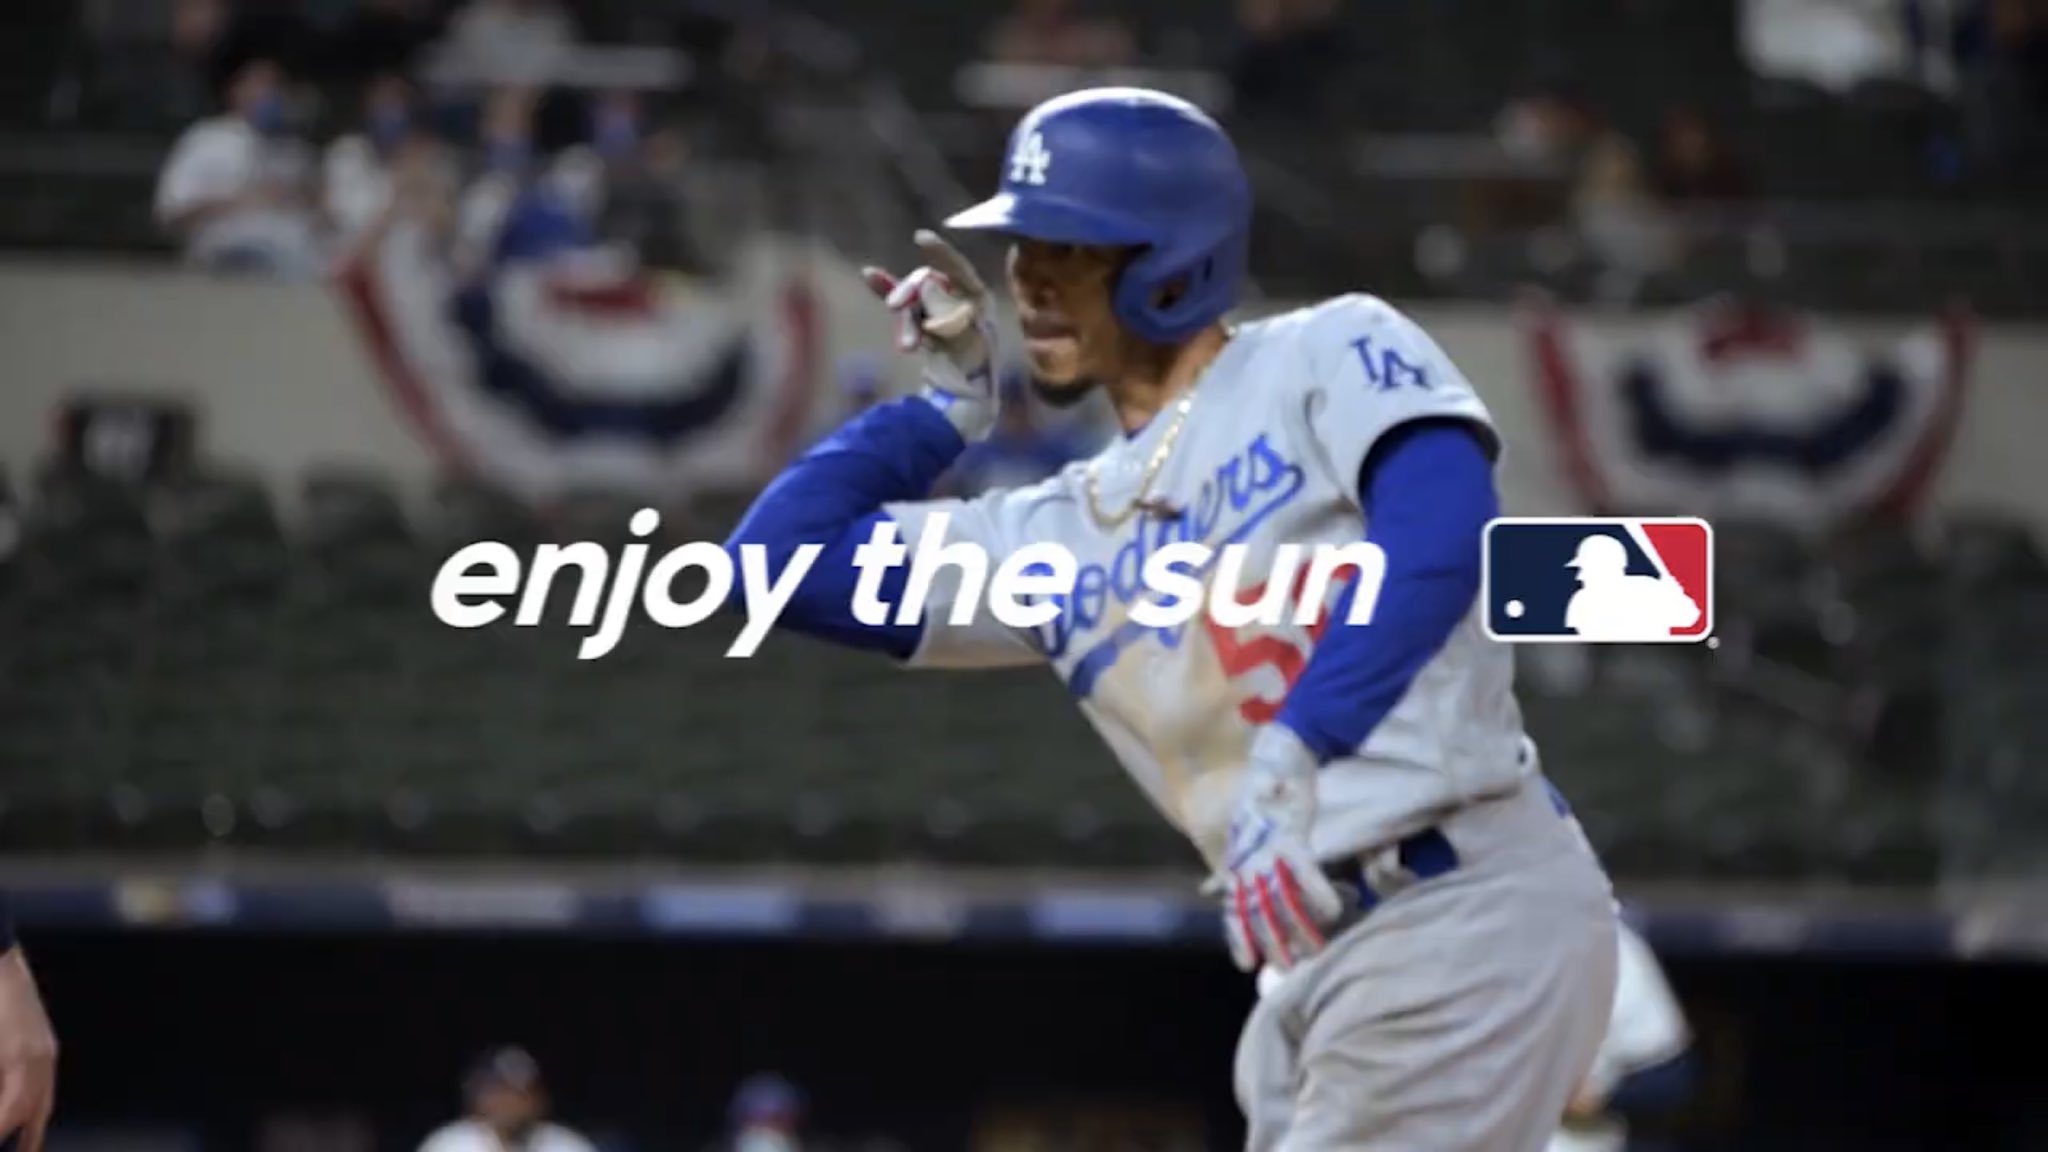 Eric Stephen on Twitter: Dodgers featured in MLB's “Enjoy the Show” ad  campaign to open the season    / Twitter